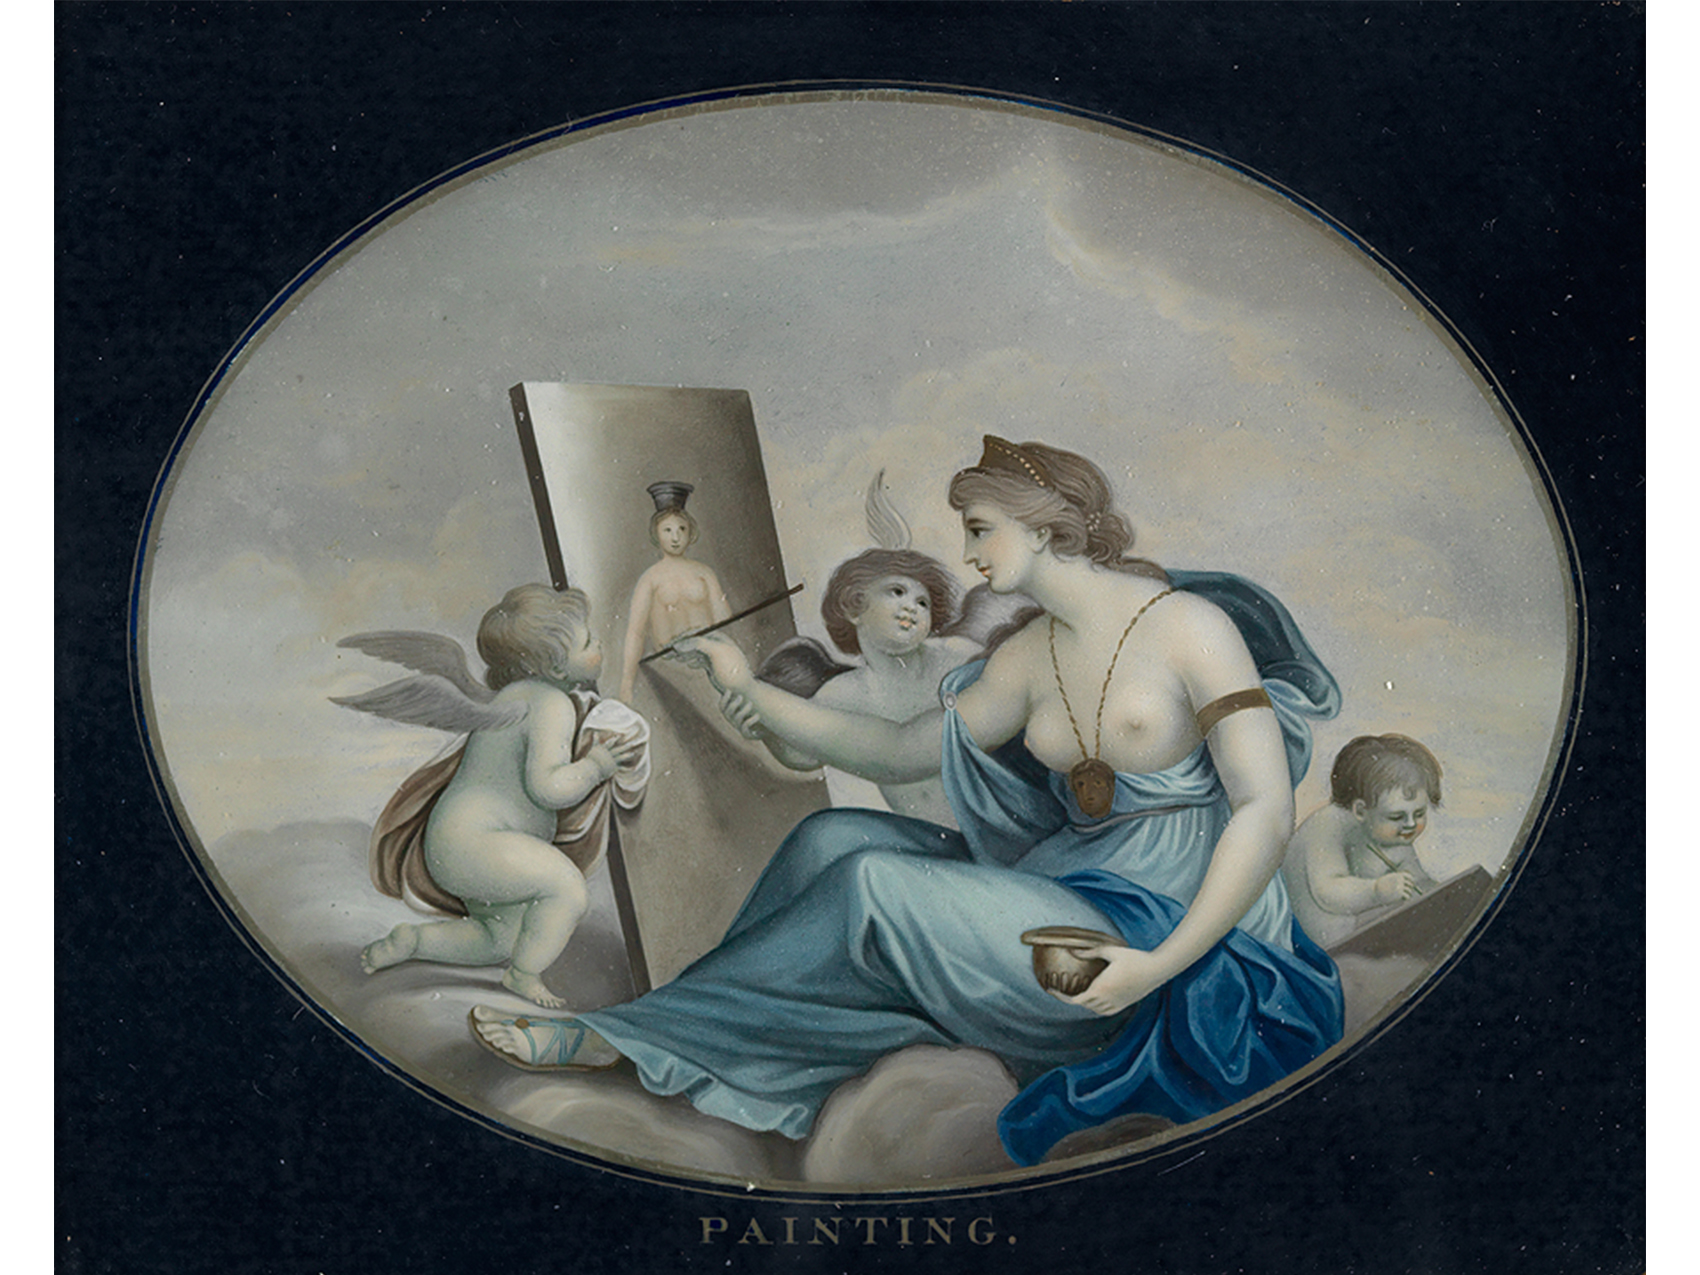 circular image of a woman wearing blue robes and painting on a propped-up canvas. next to her, two infant angels watch her paint. a third angel sits in the background, writing in a book. the circular image is surrounding by black edges and text on the bottom that says, "PAINTING."